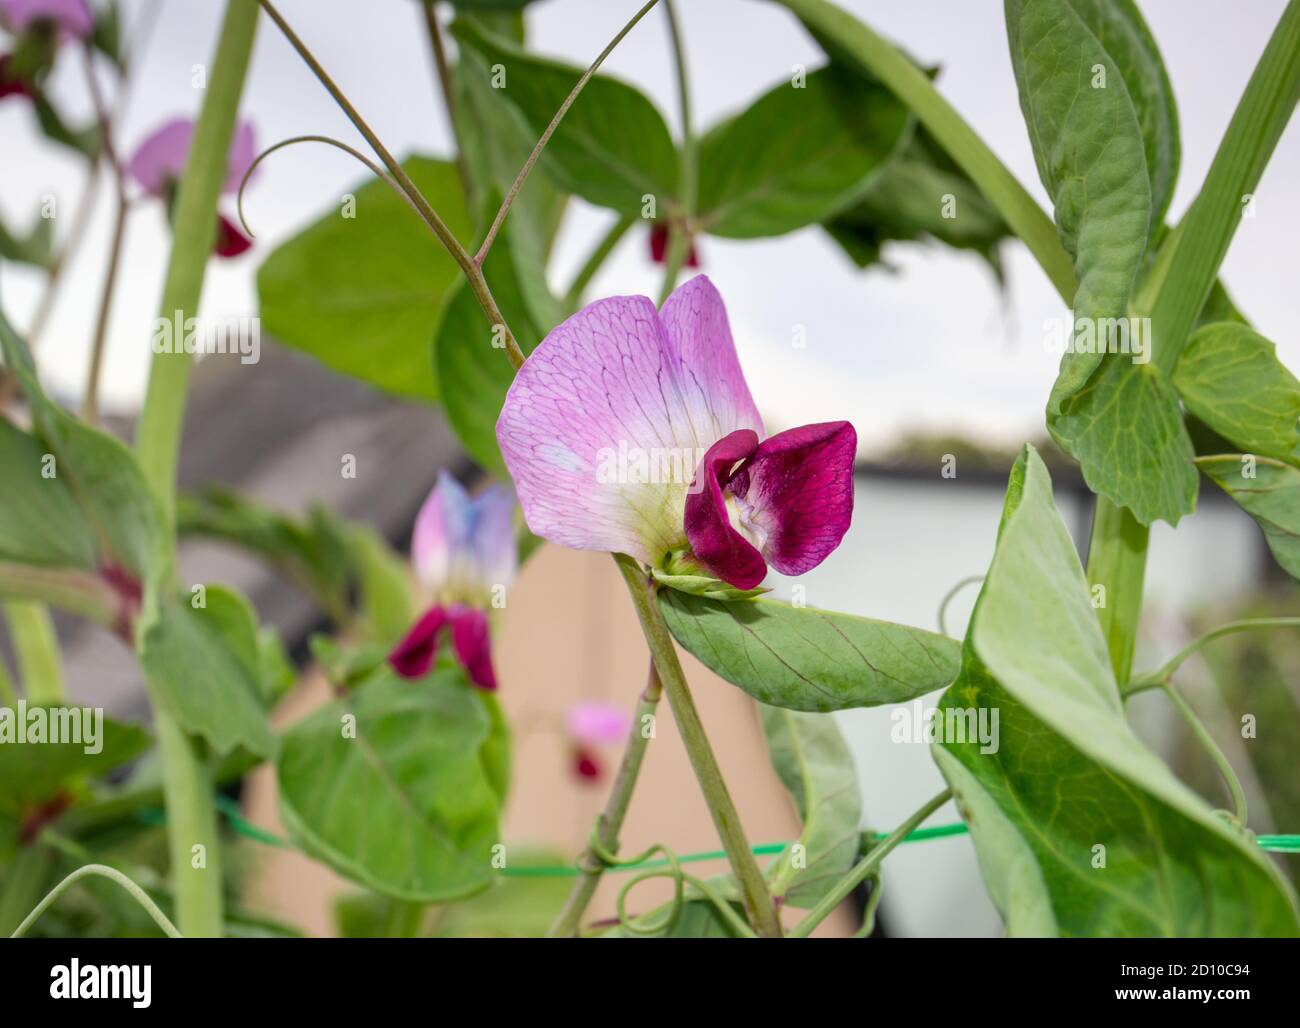 Stunning unusual purple pea blossom. Close up of heirloom Snow Pea plant 'Purple Mist'. Soft bokeh background of rooftop hatch and pea plants. Urban s Stock Photo